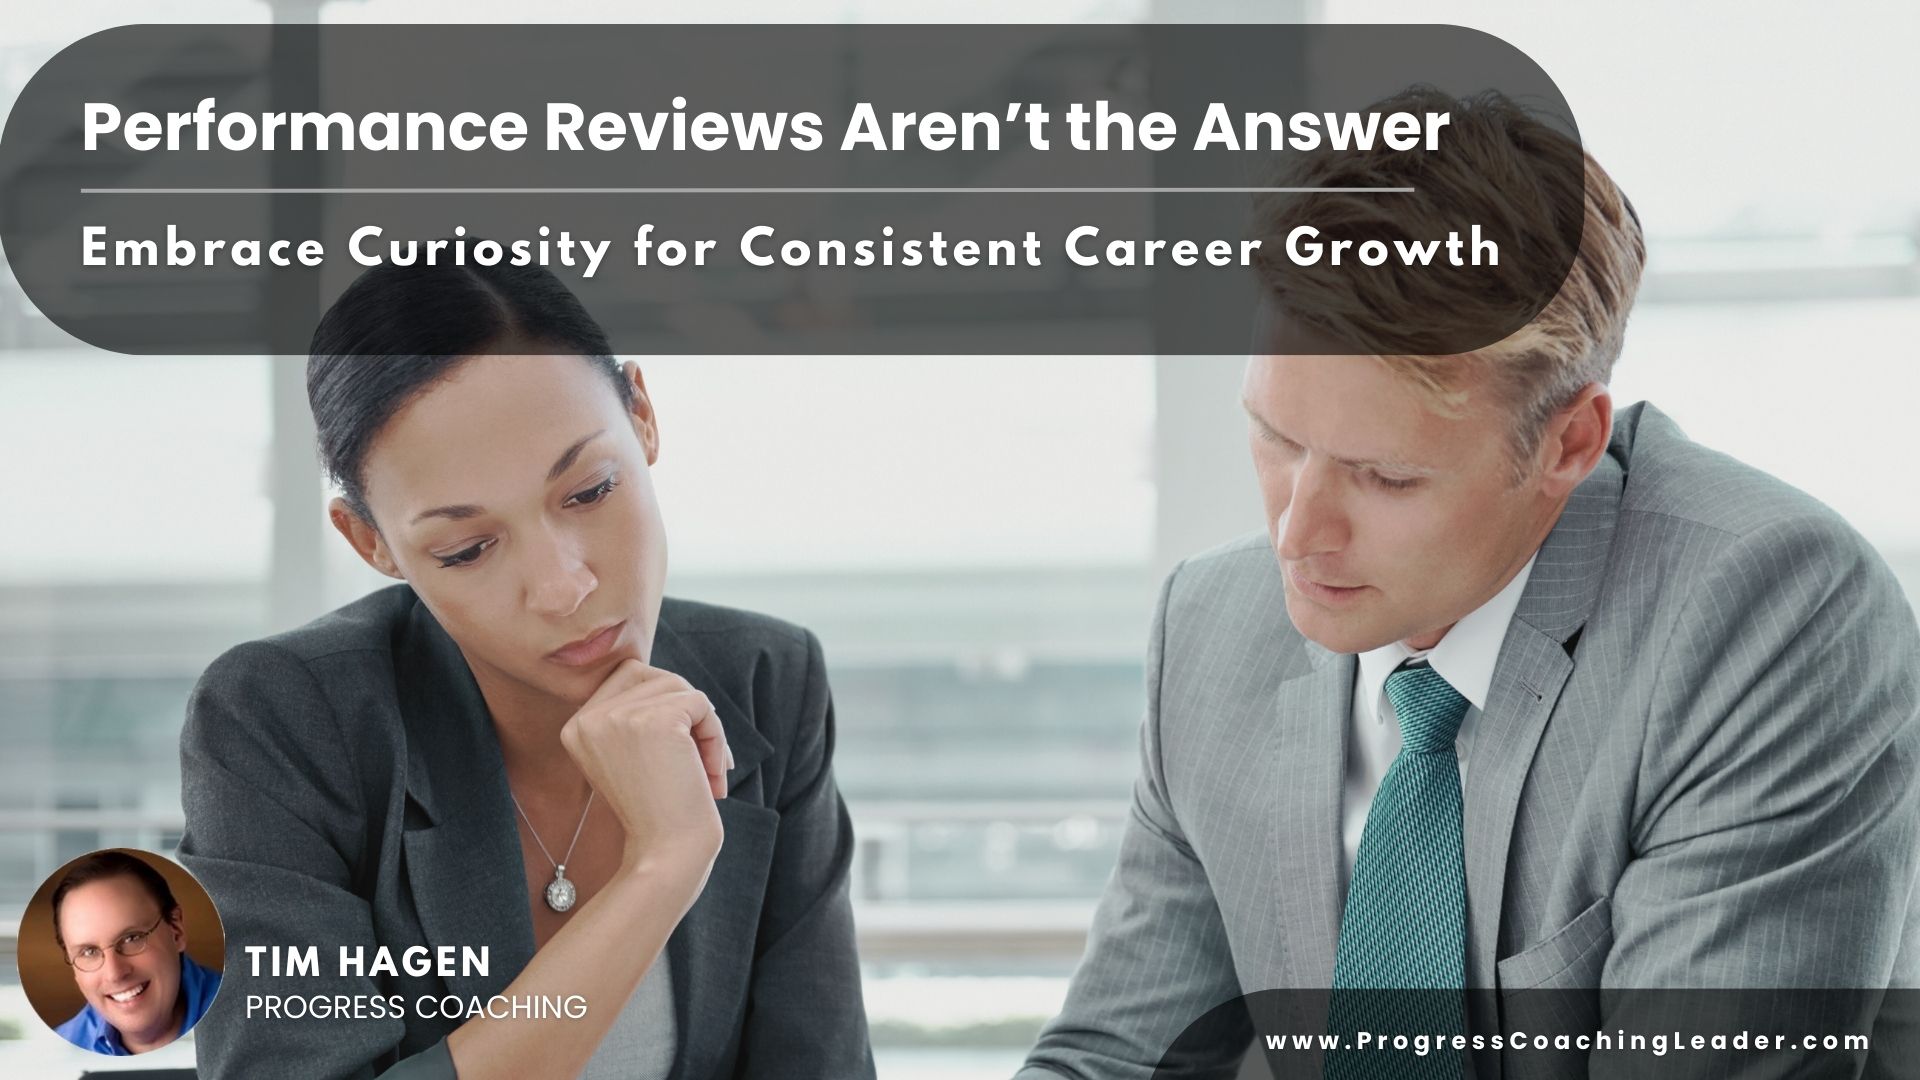 Performance Reviews Aren't the Answer: Embrace Curiosity for Consistent Career Growth